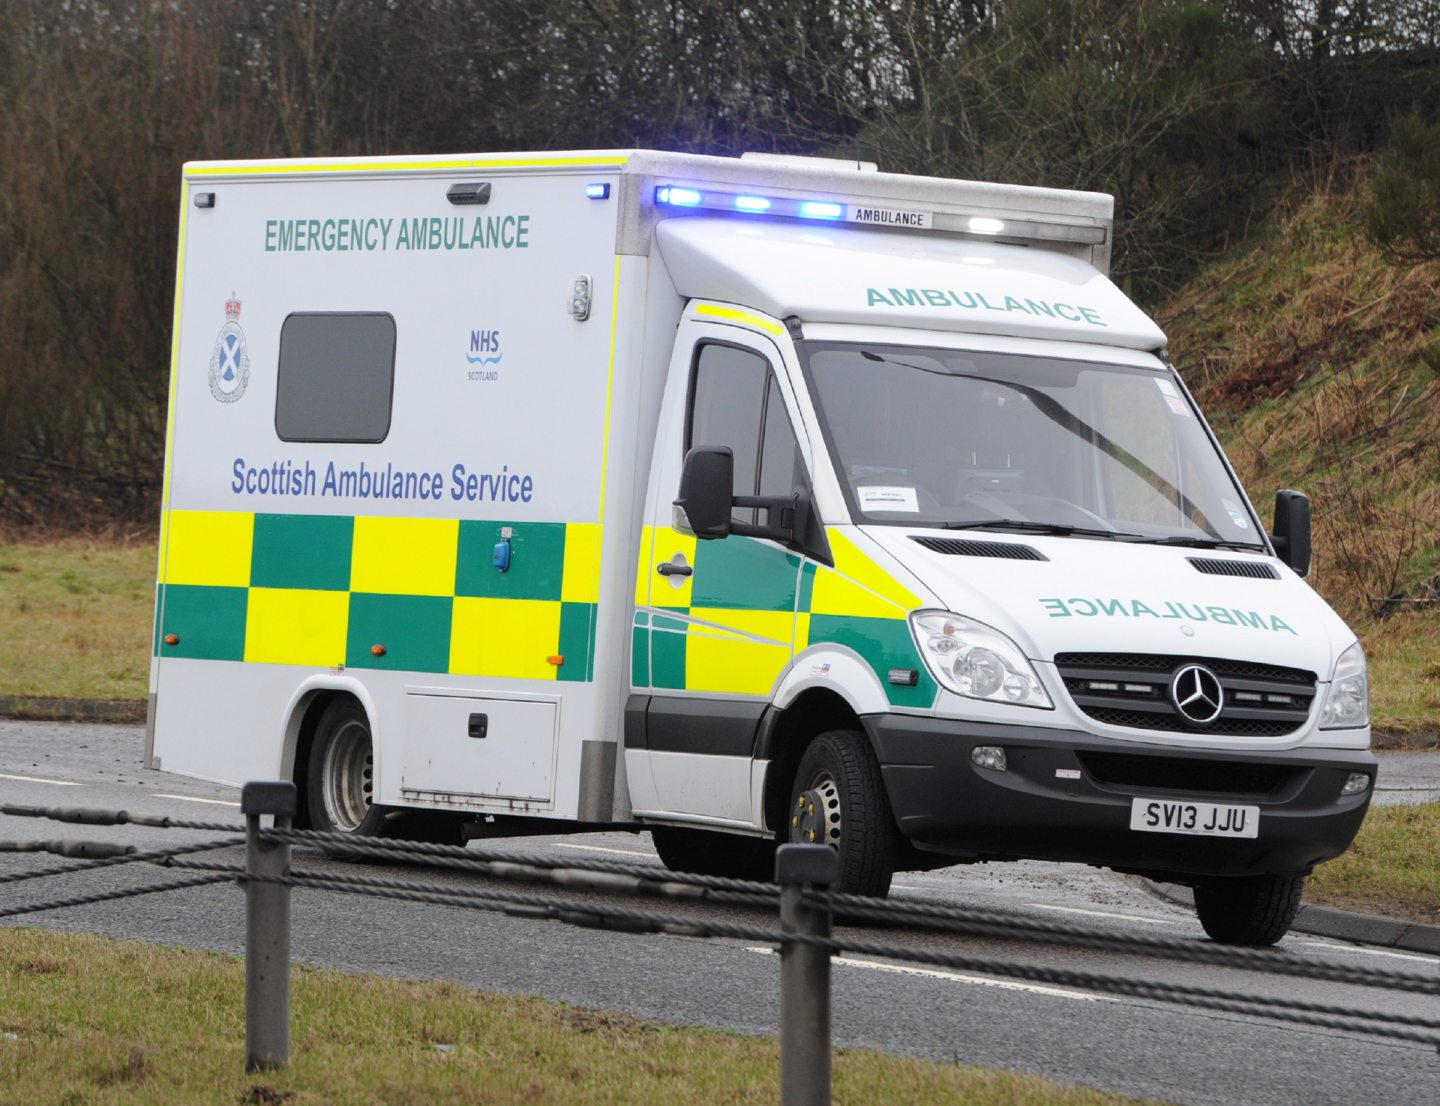 The standby Turriff ambulance is one of several initiatives being introduced to Grampian. Image: Chris Sumner/ DC Thomson